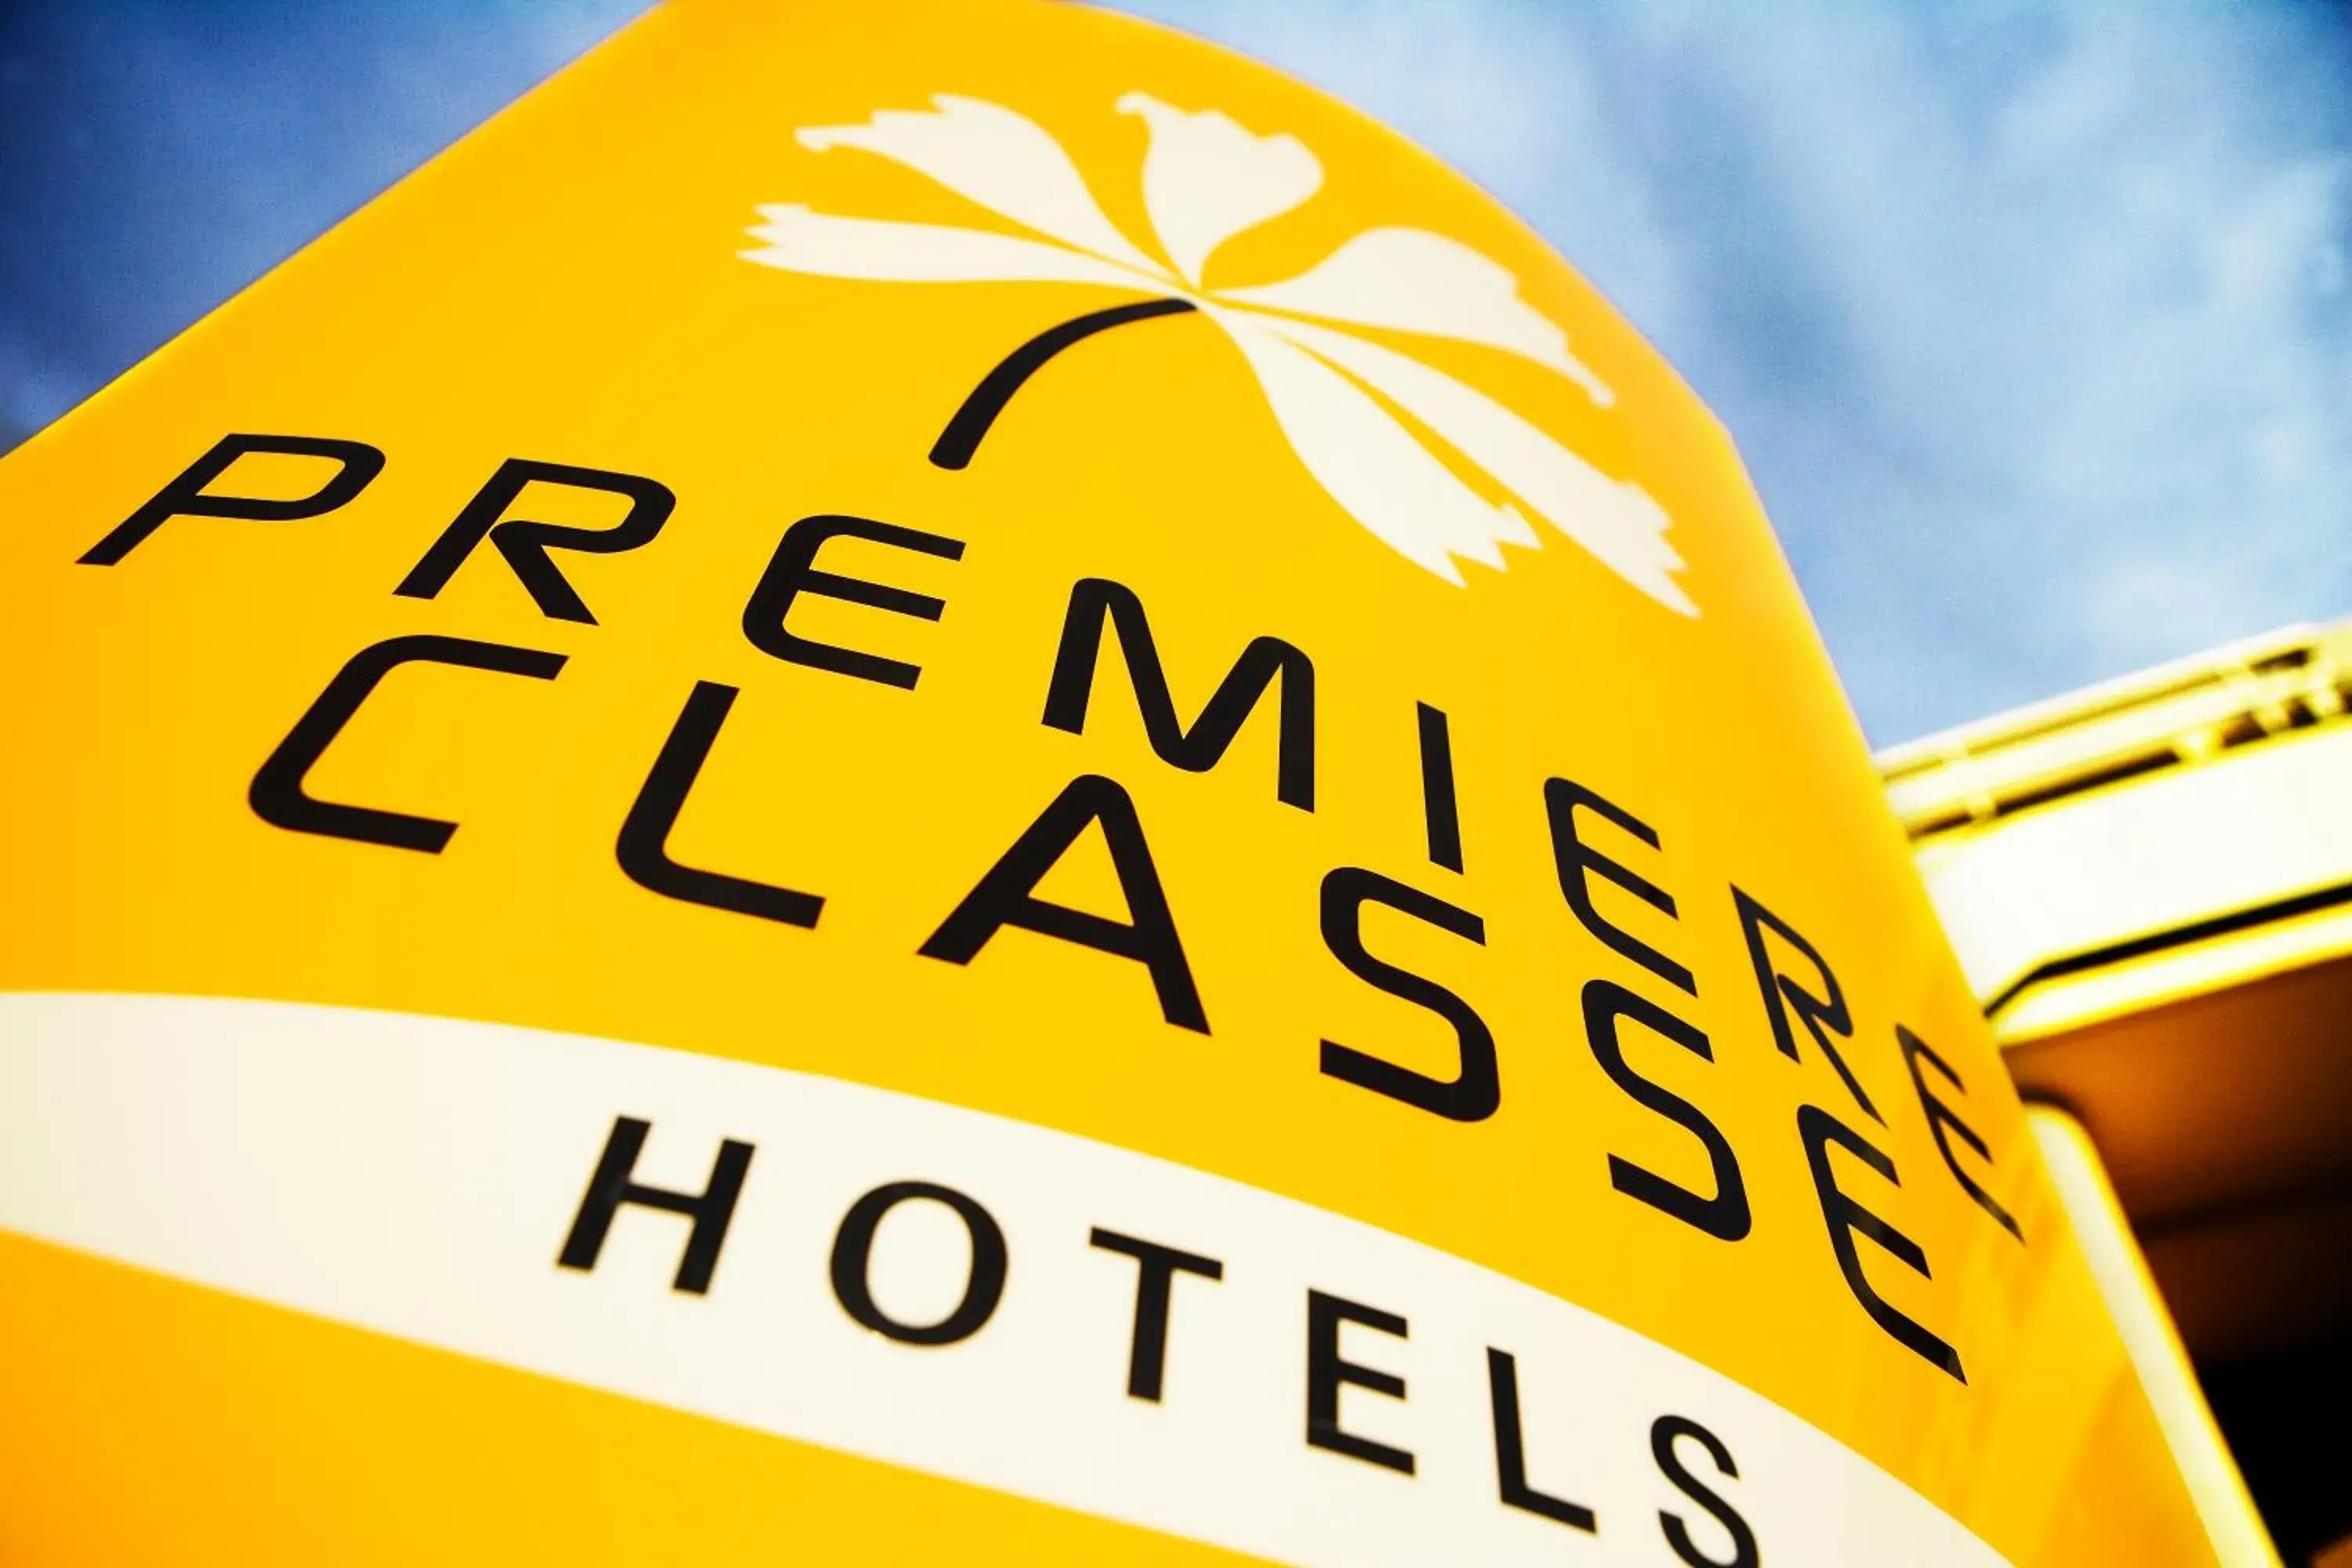 Property logo or sign in Premiere Classe Gueret